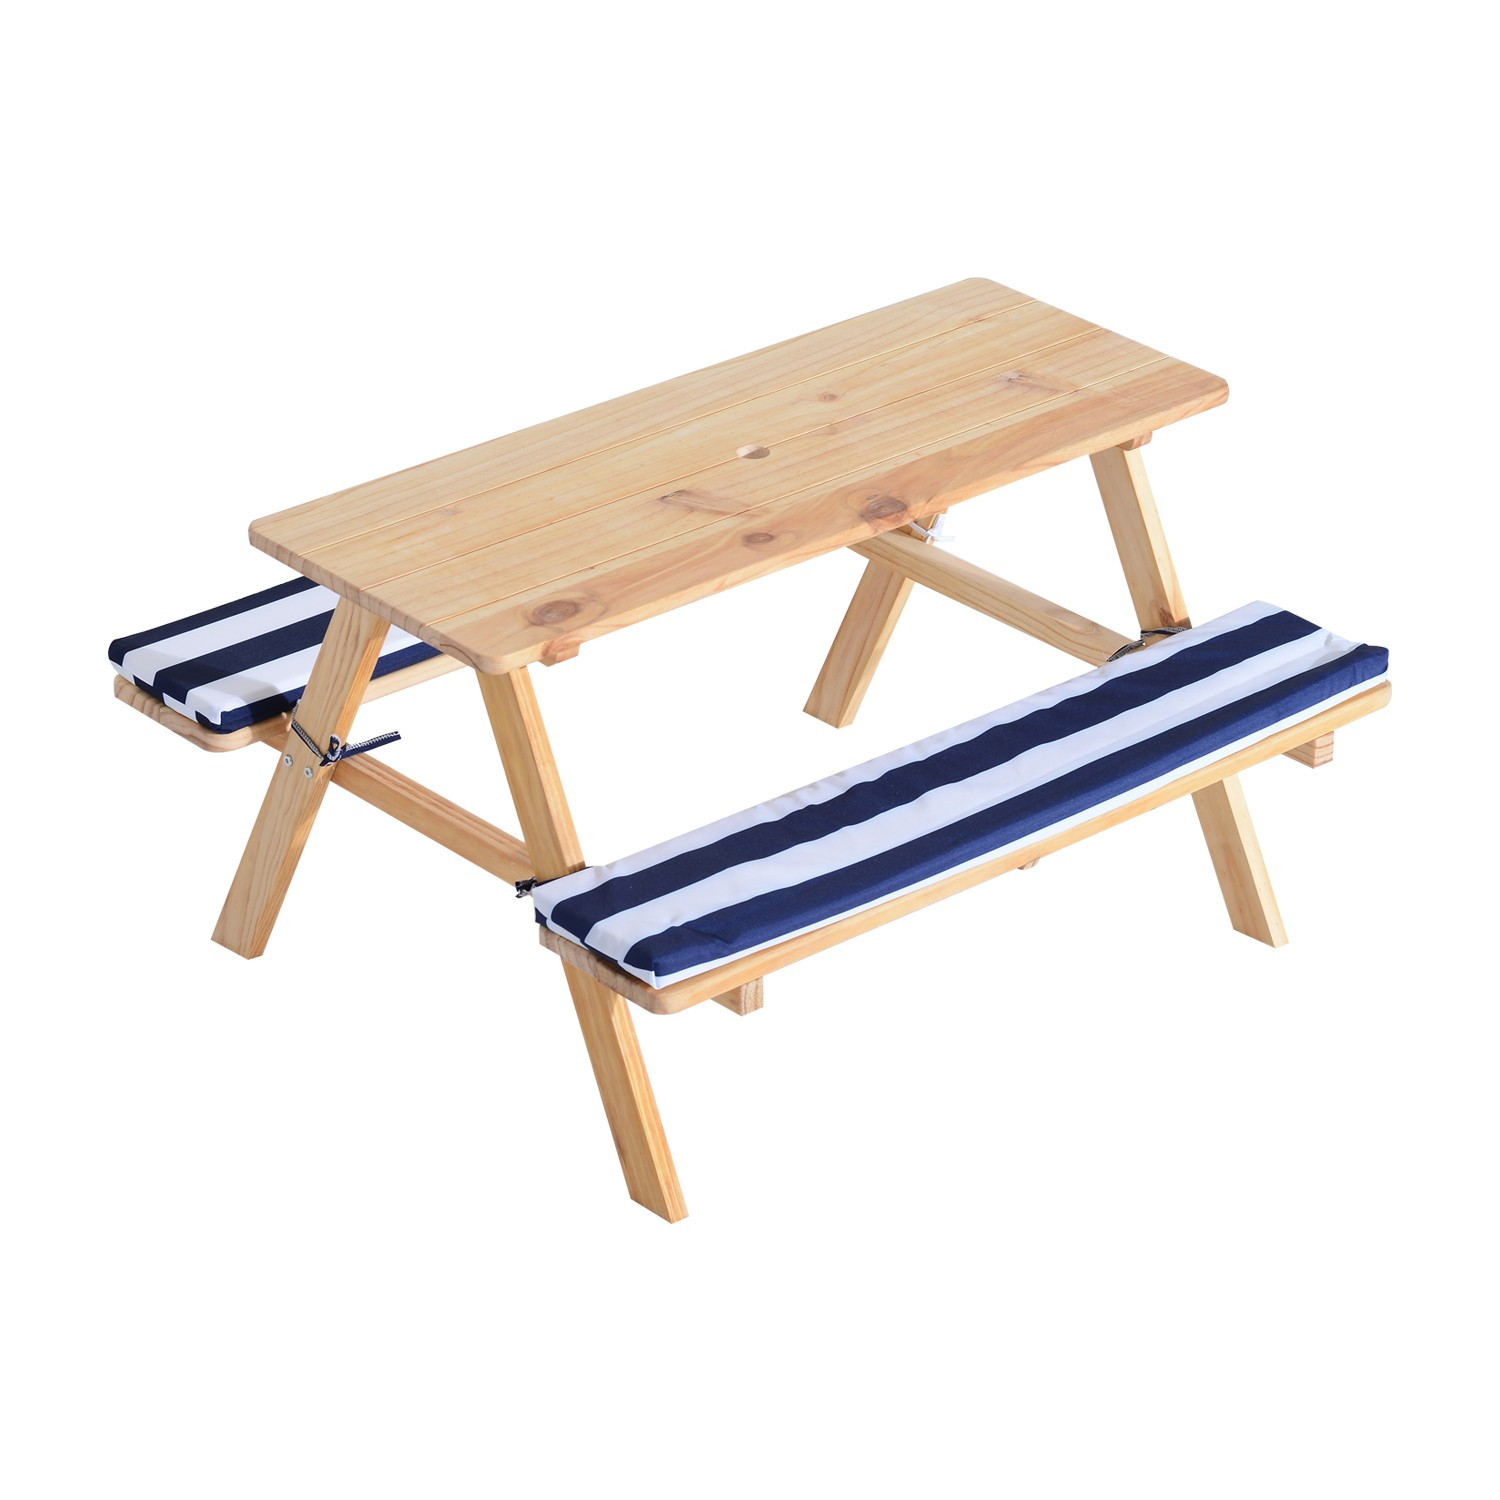 Kids Wooden Picnic Table
 Qaba Wooden Outdoor Kids Picnic Table with Padded Benches